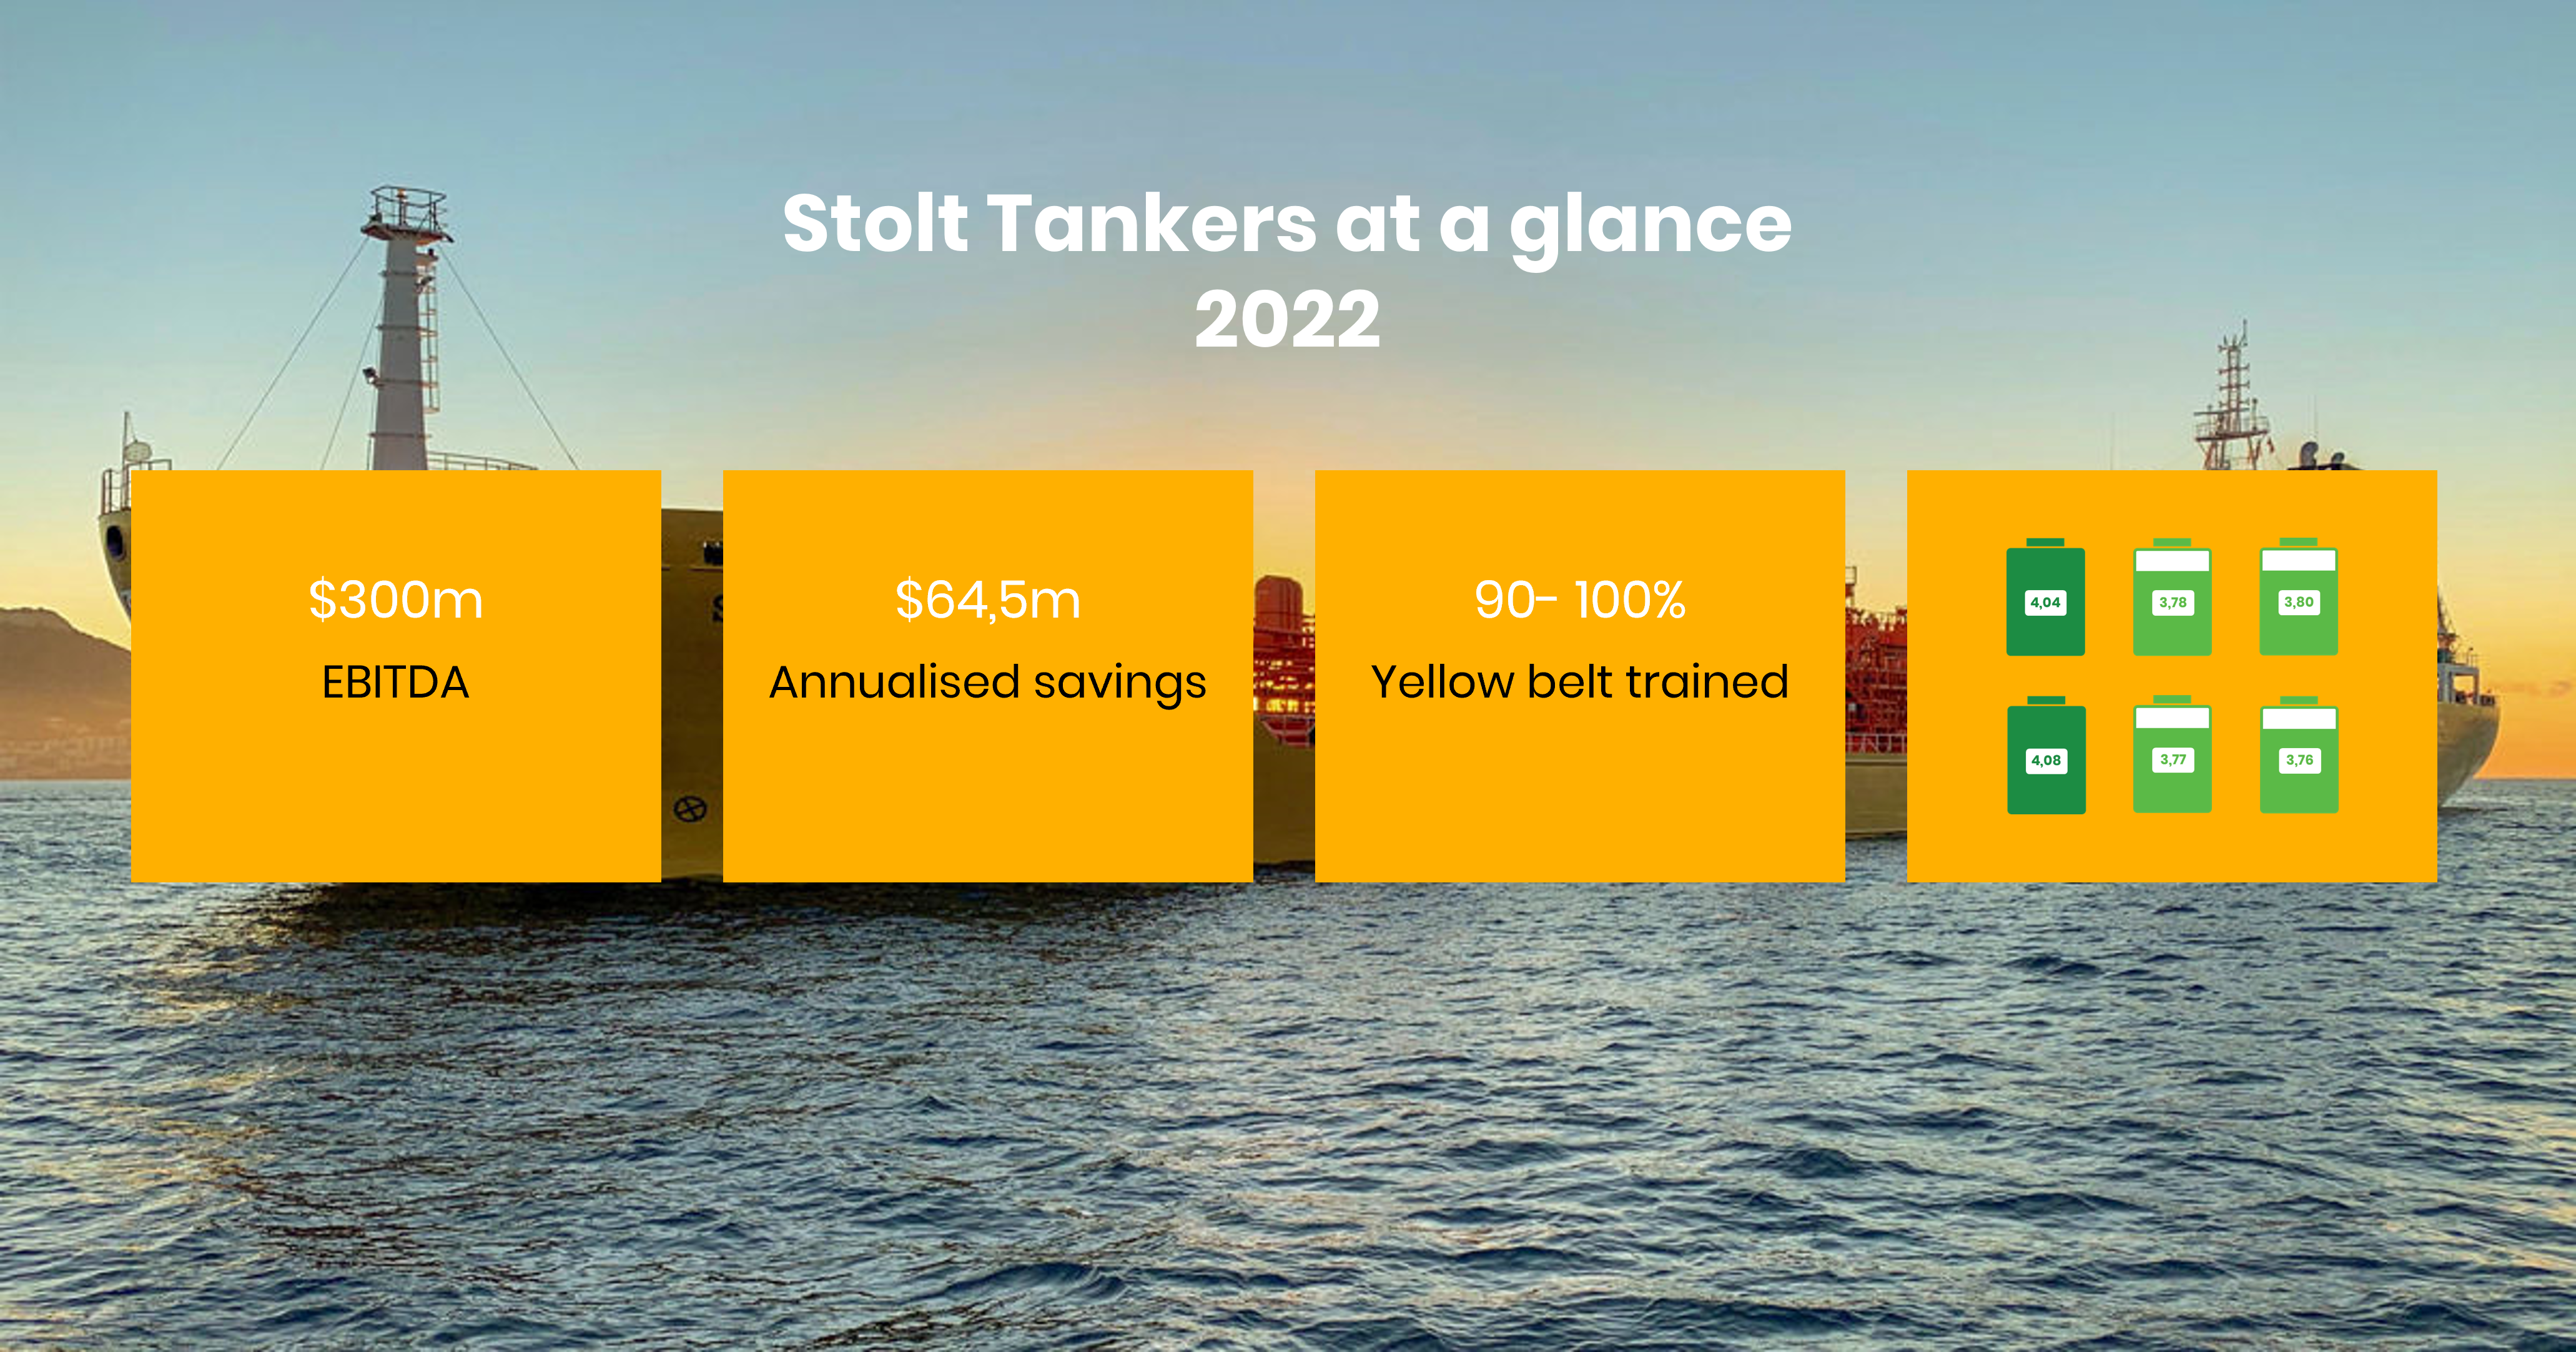 Turning the tide of the tankers